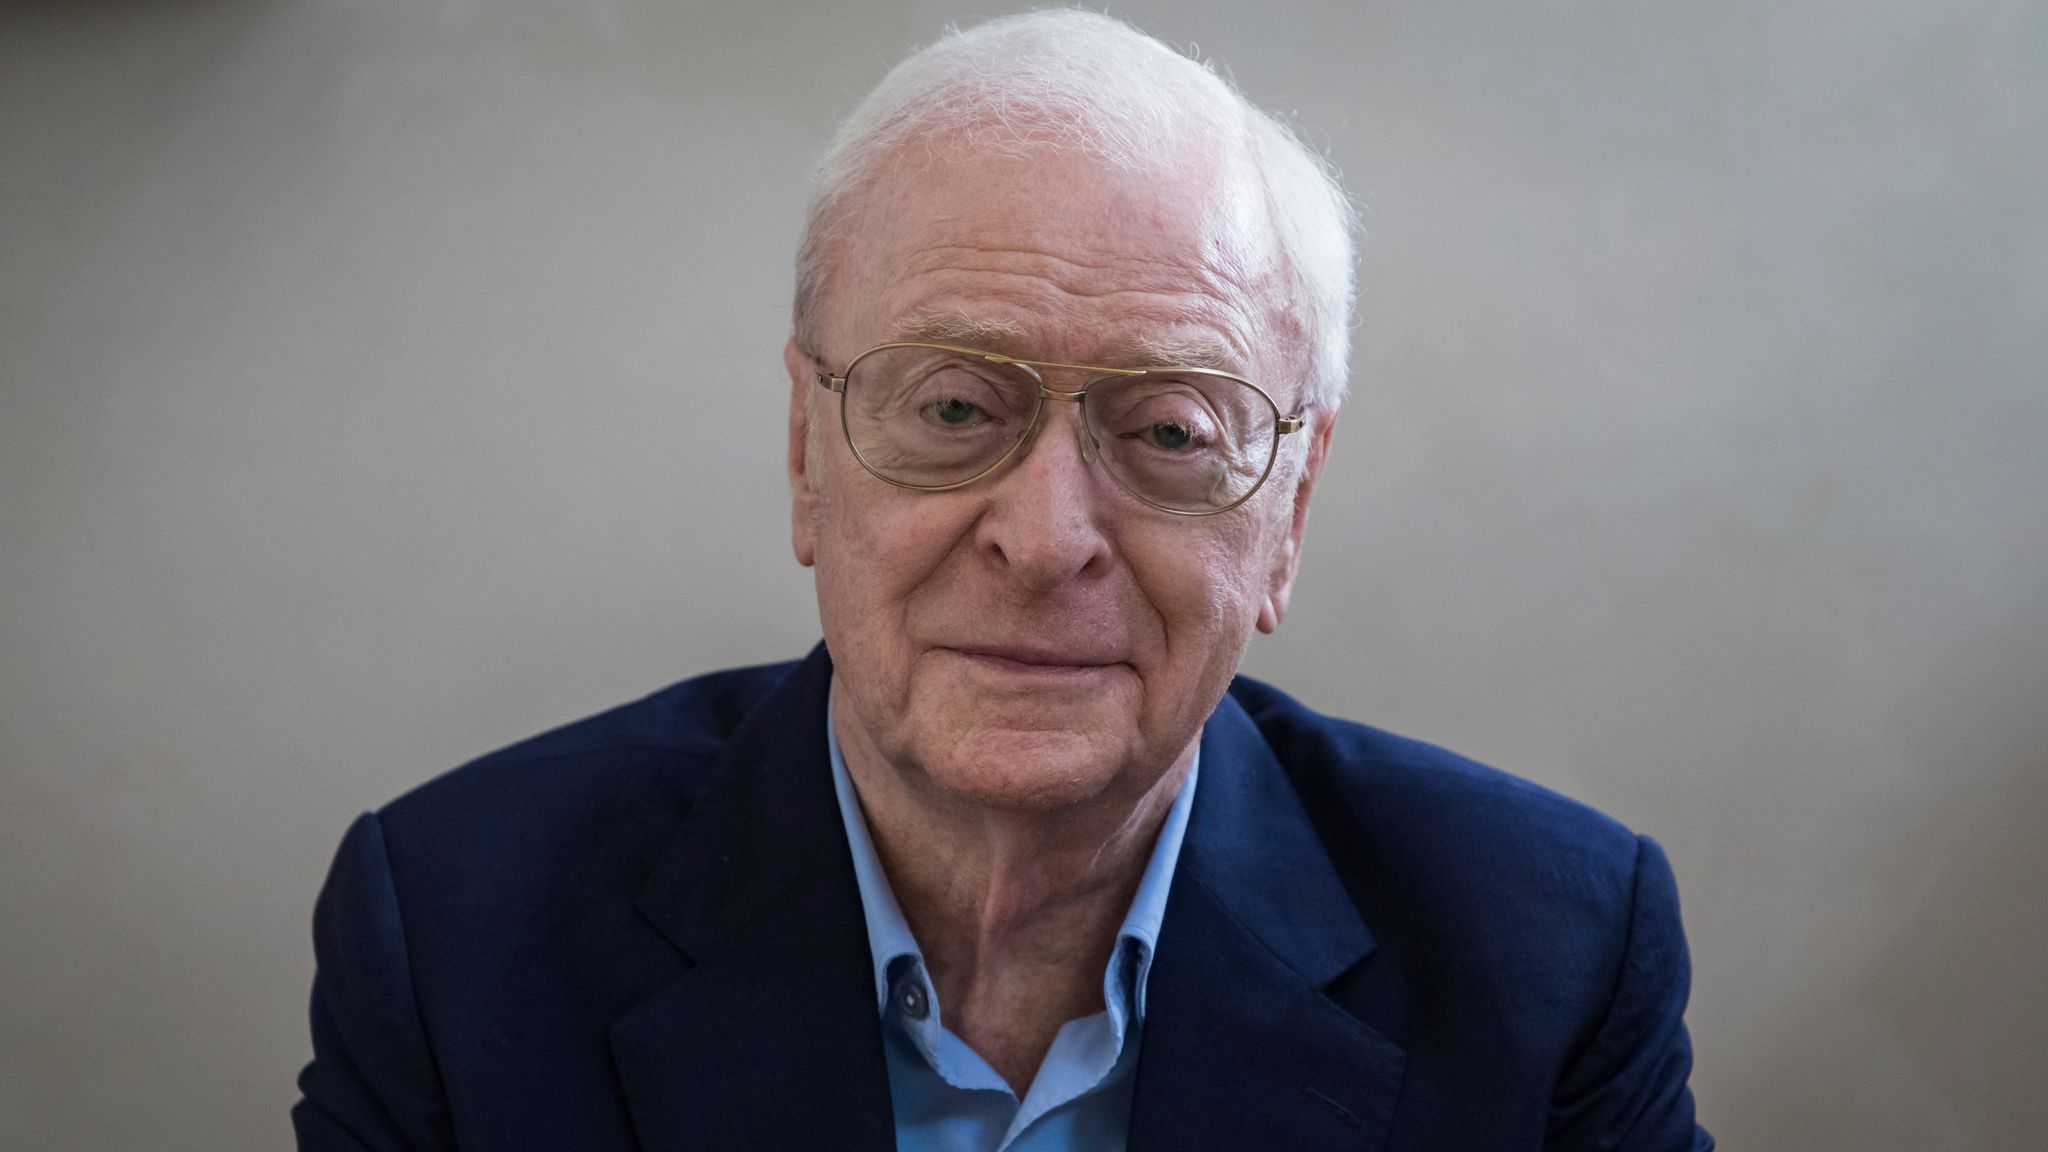 Sir Michael Caine confirms retirement from acting, saying: 'You